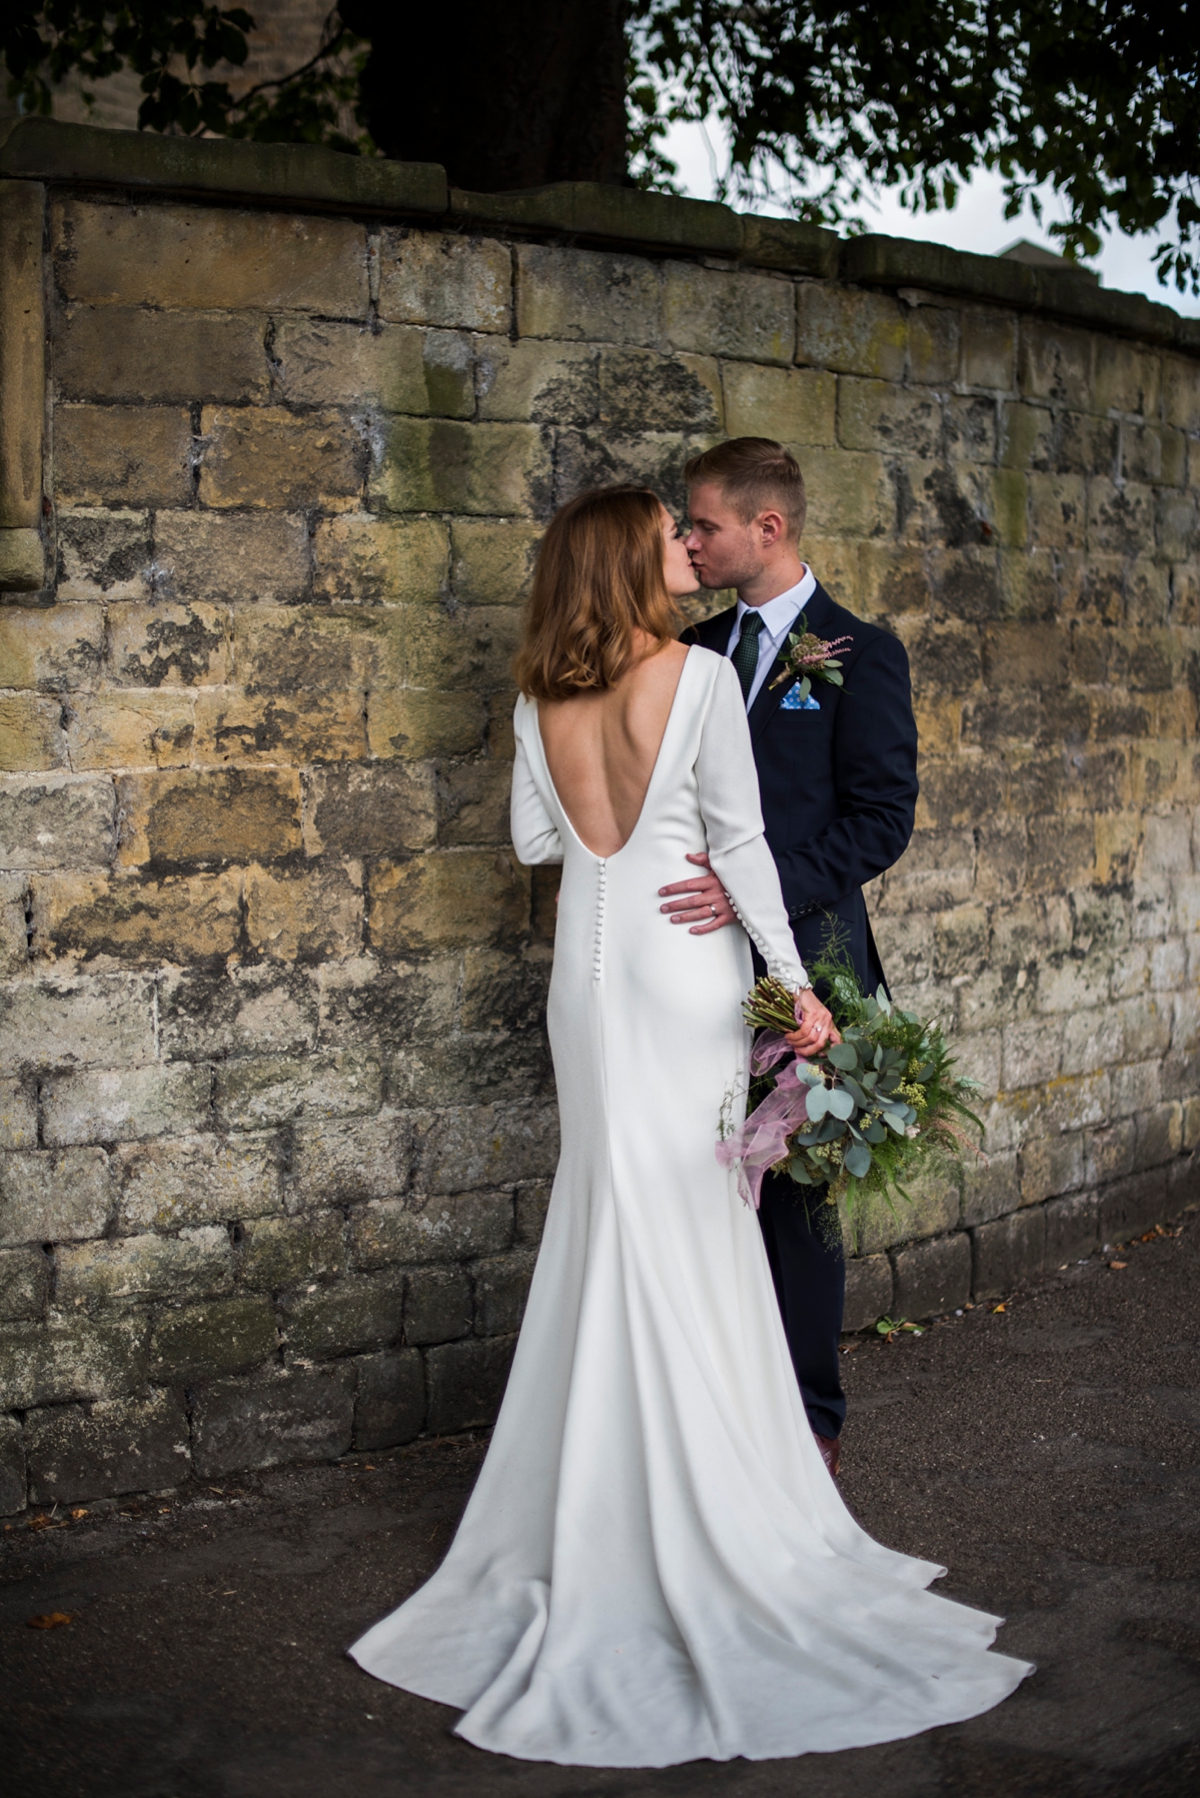 20 A beuatiful long sleeved and backless Pronovias gown for a wedding in Bakewell in Derbyshire